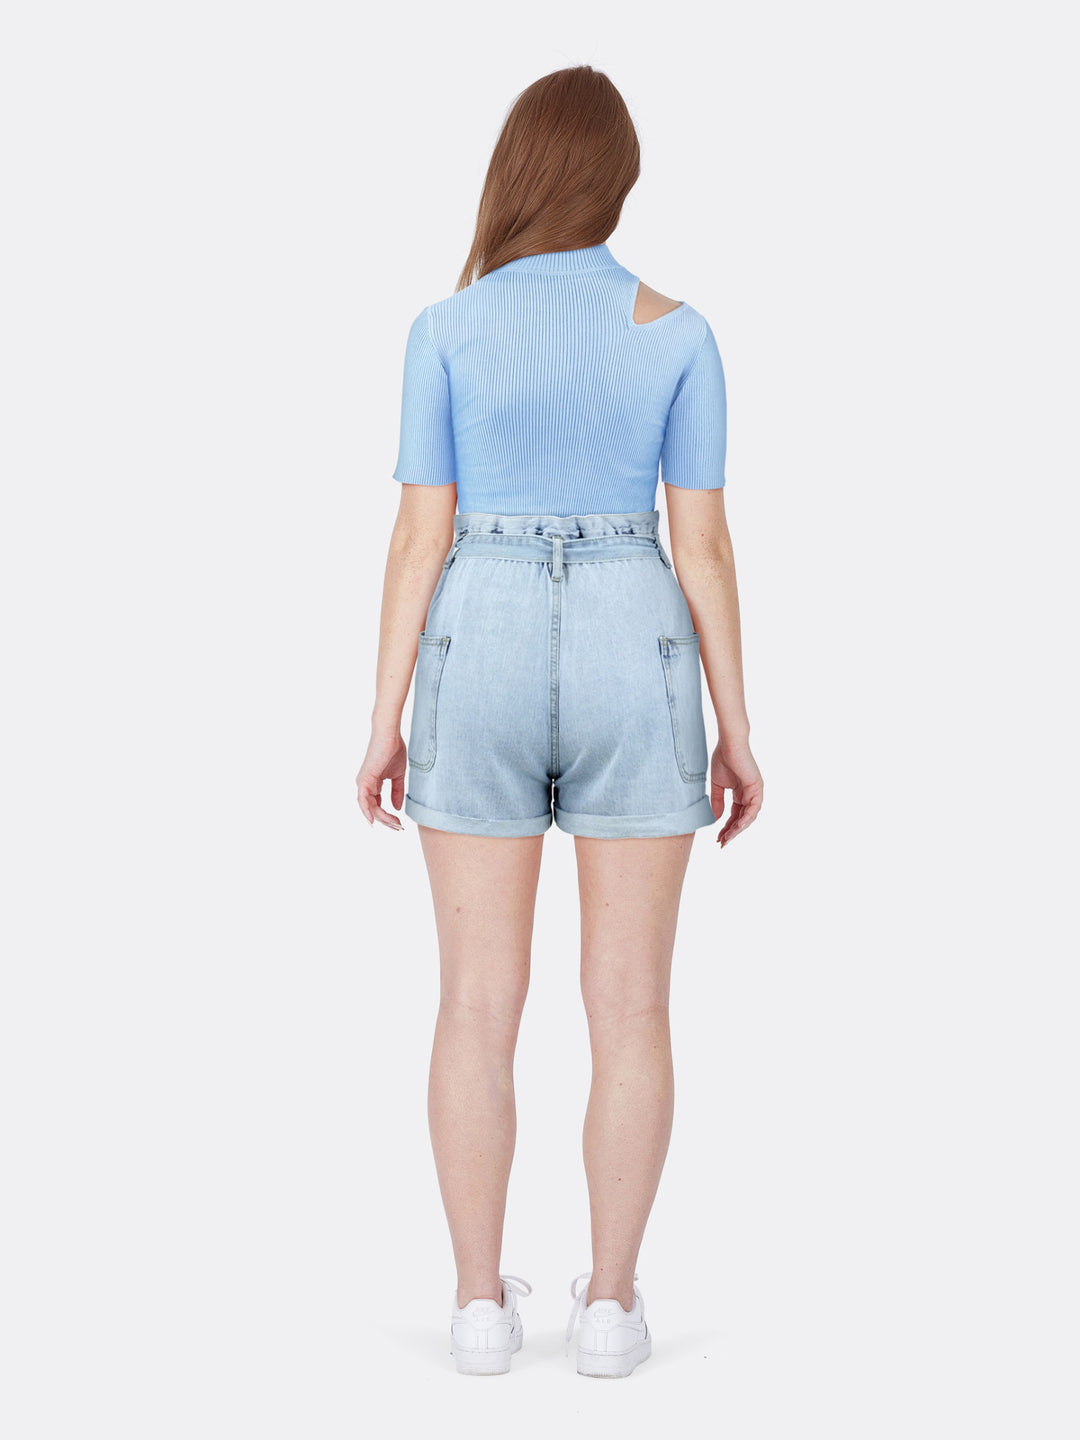 High Neck Short Sleeve Knitted Ribbed Crop Top with Cut Out Blue Back | Jolovies